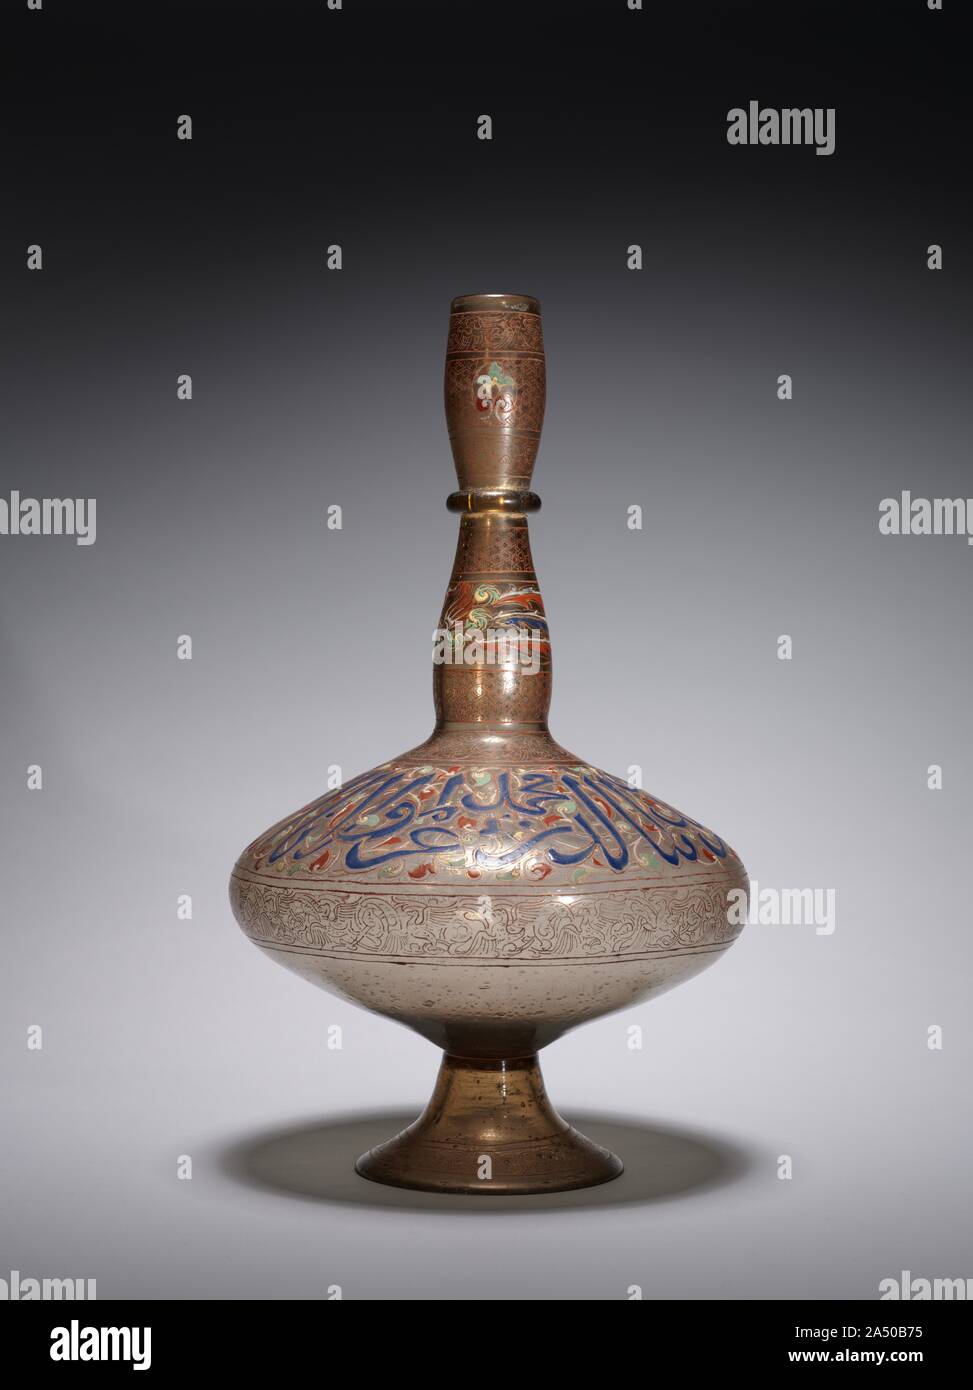 Bottle, c. 1900. The bold inscription on the body of the bottle translates: &quot;Glory to our lord, the sultan, the king, the victorious, the protector of the world and the religion, Muhammad.&quot; This is the same Mamluk sultan, Muhammad ibn Qalaun referred to on the mosque lamp. Stock Photo